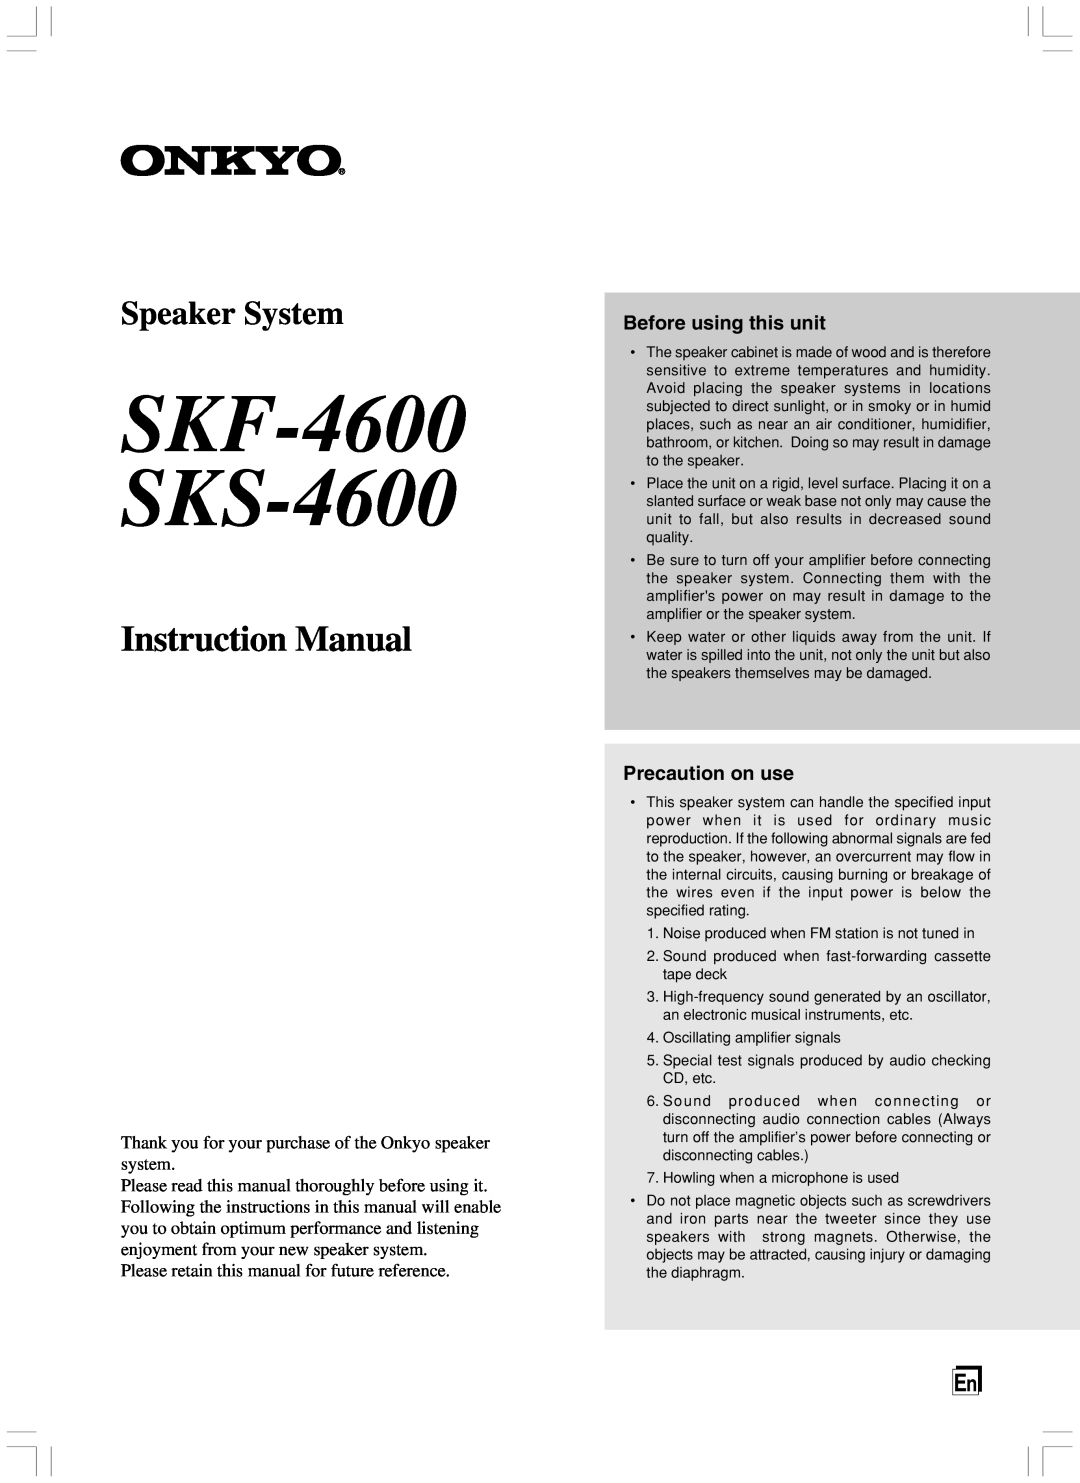 Onkyo instruction manual SKF-4600 SKS-4600, Speaker System, Before using this unit, Precaution on use 